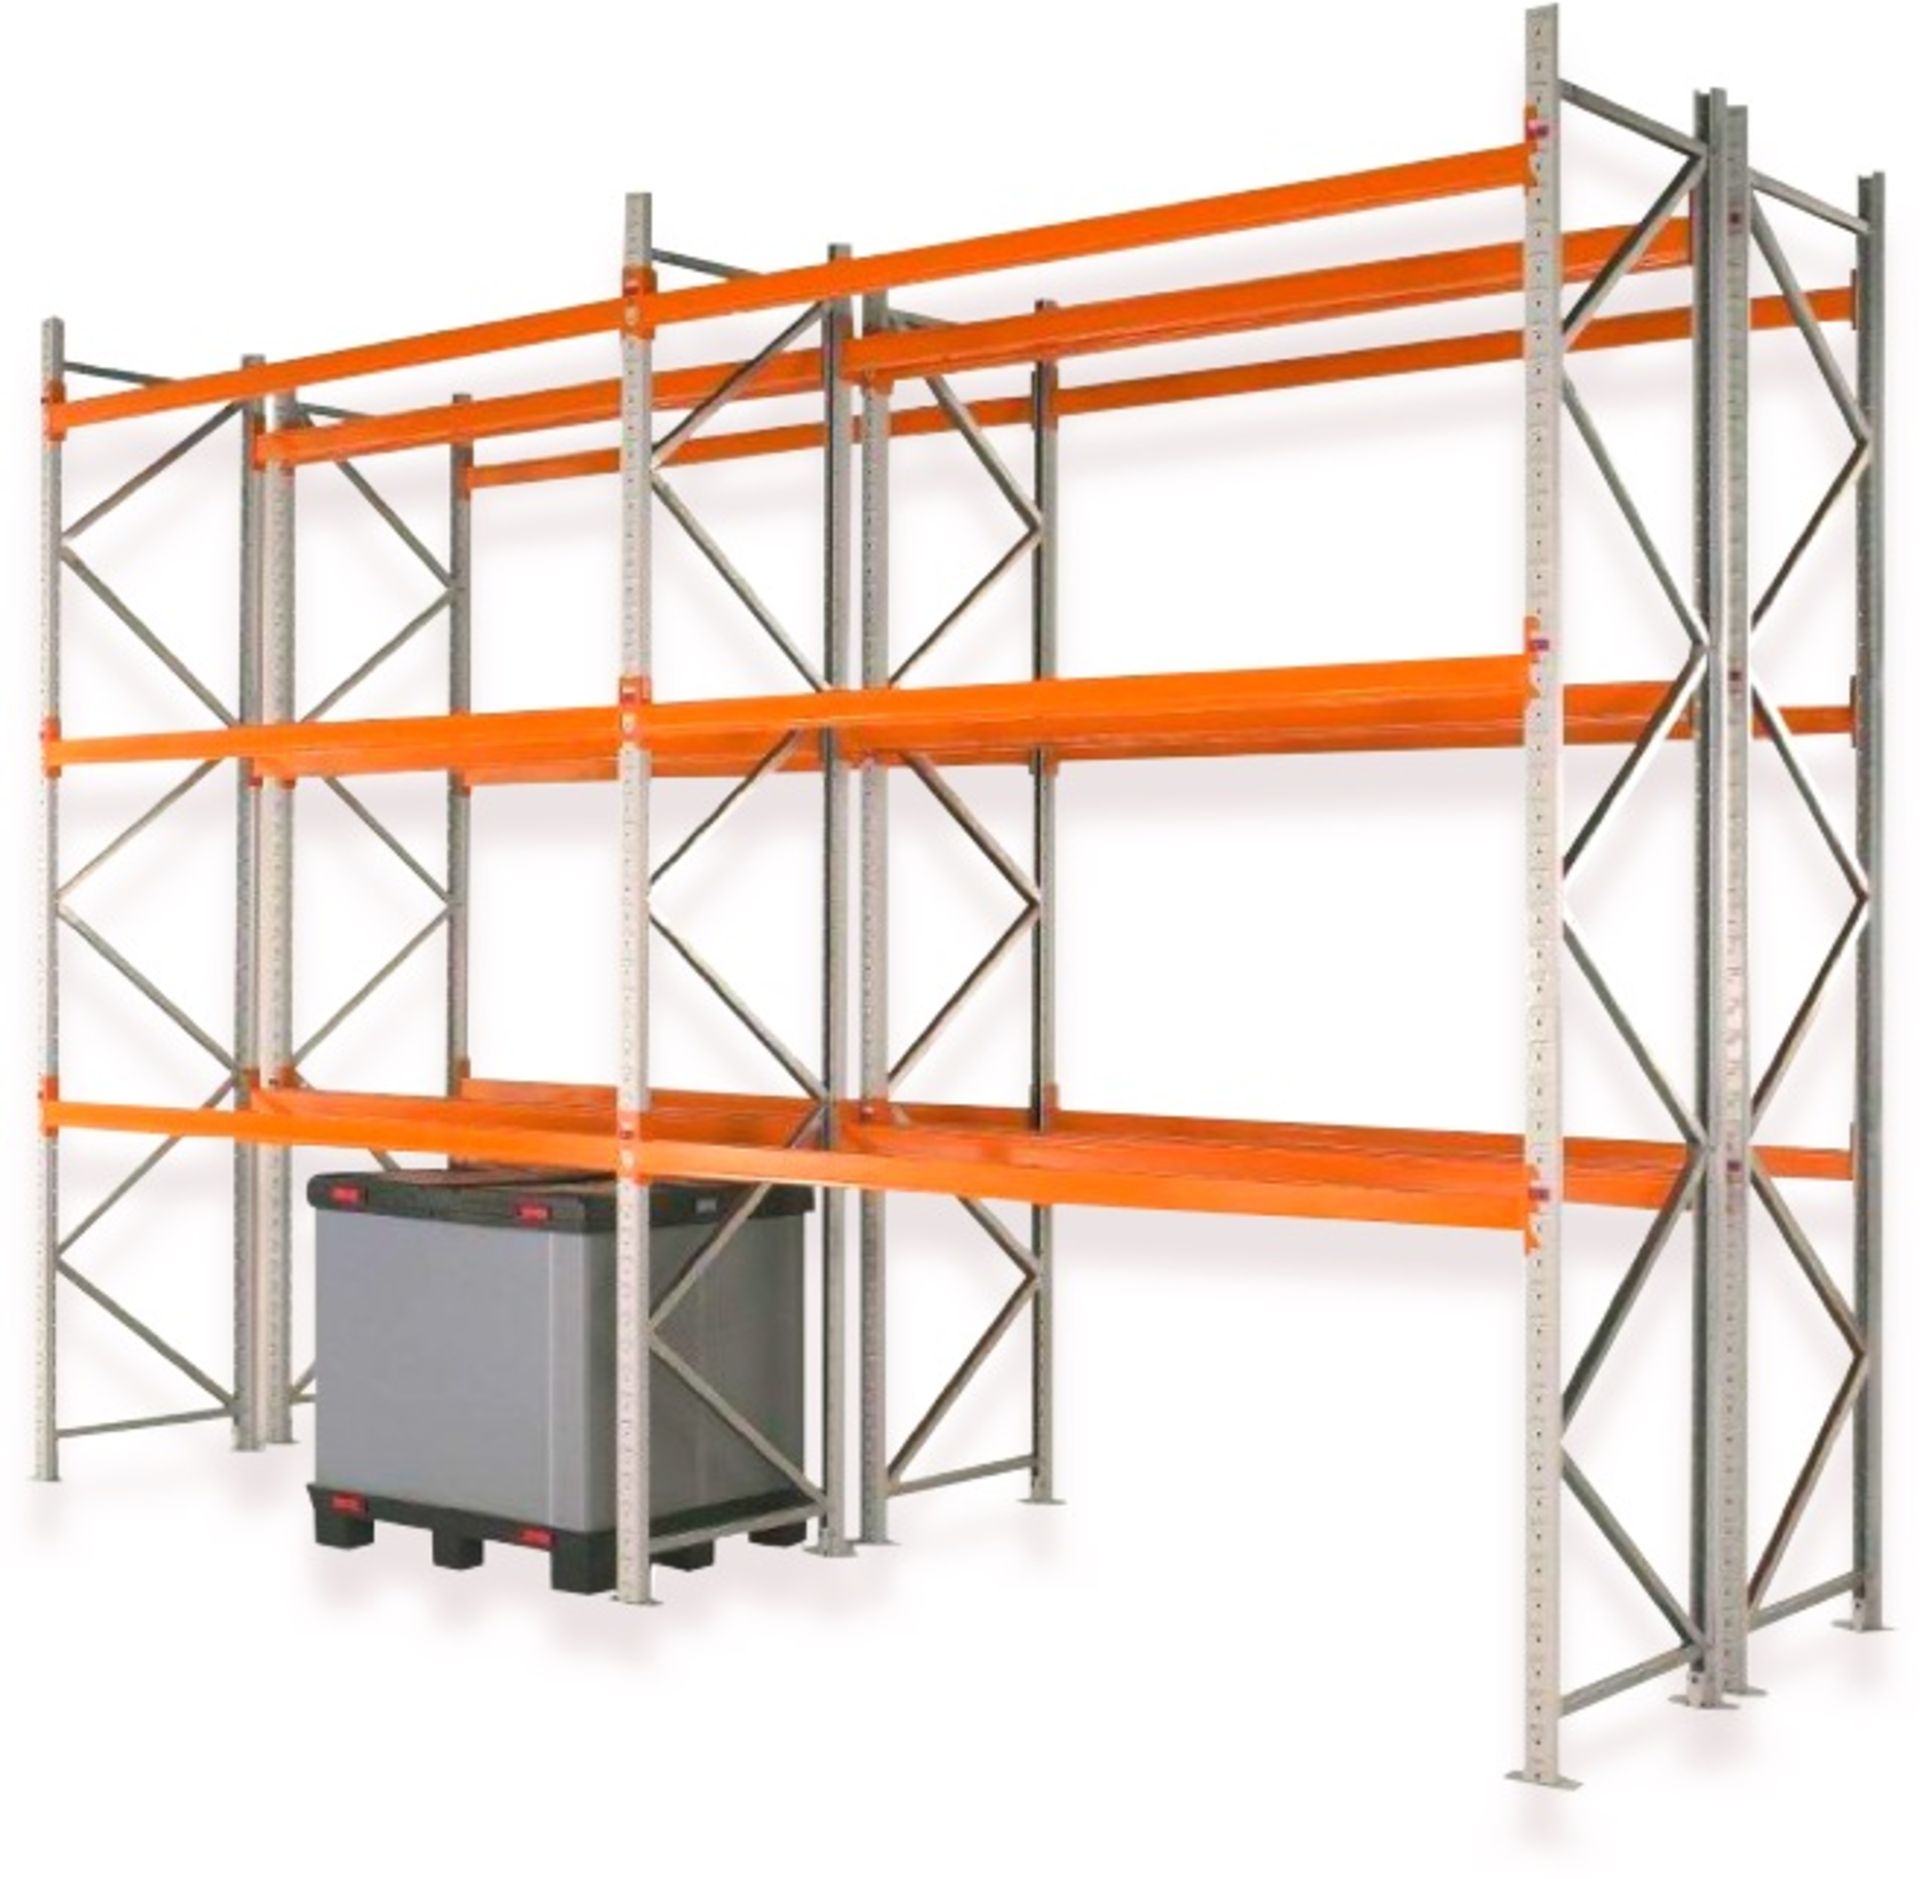 9 x Bays of Apex Pallet Racking - Includes 10 x Apex 16 UK 16,000kg Capacity Uprights and 60 x